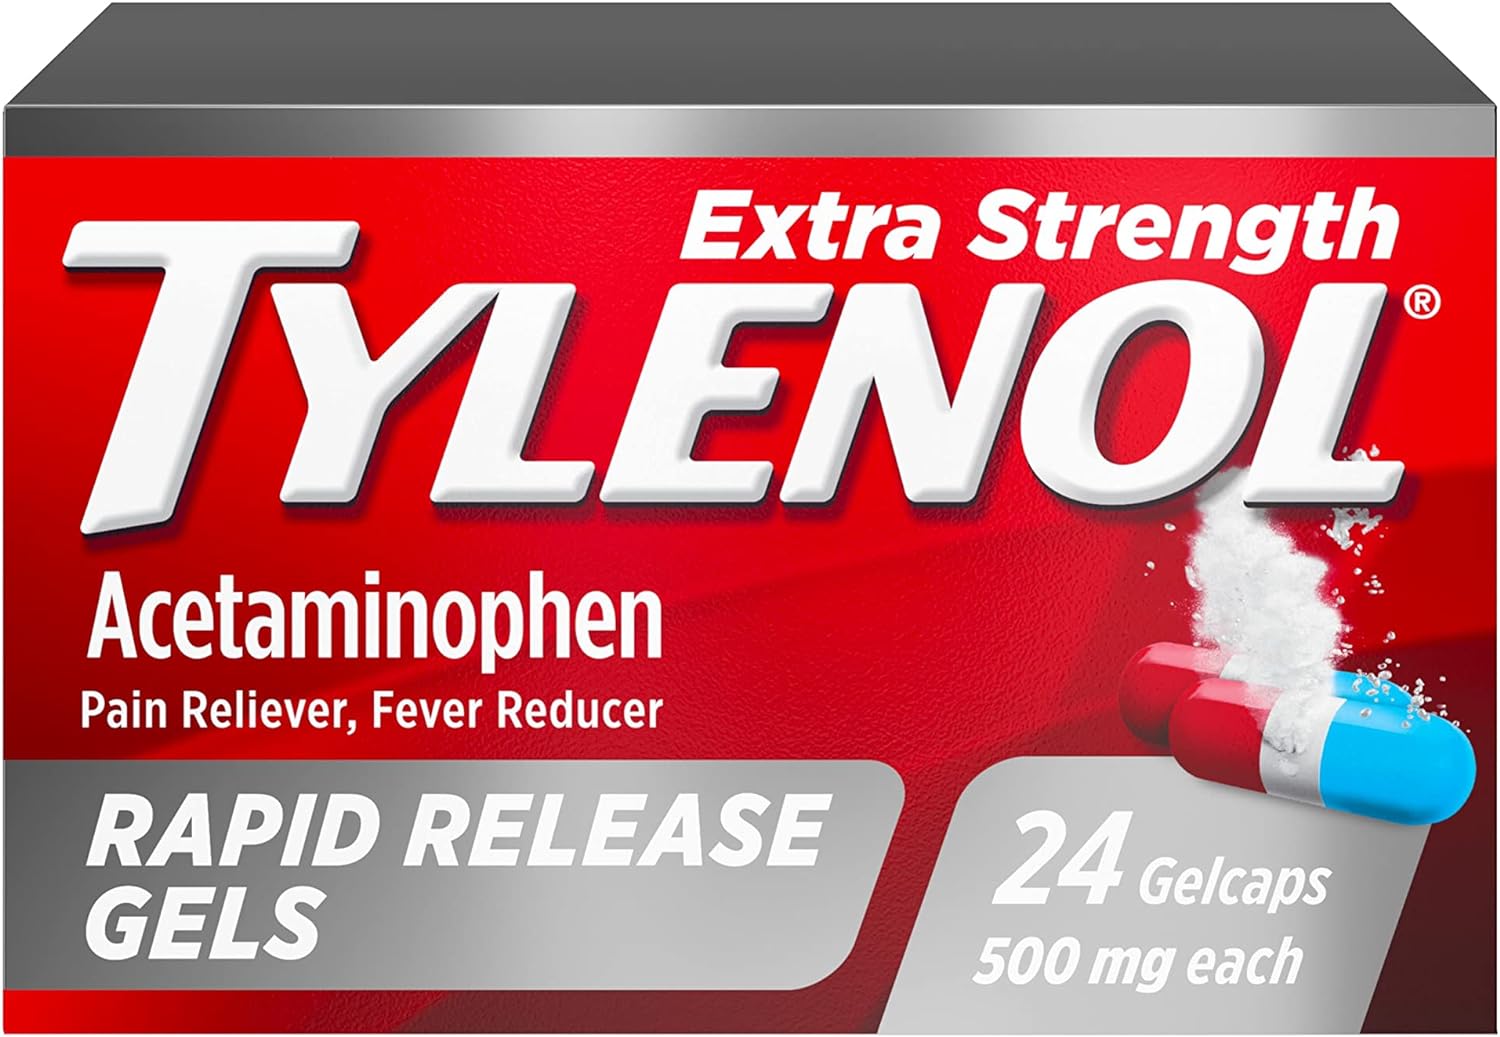 24-Count Tylenol Extra Strength Acetaminophen Rapid Release Gels for Pain & Fever Relief $2.45 w/ S&S + Free S&H w/ Prime or $35+